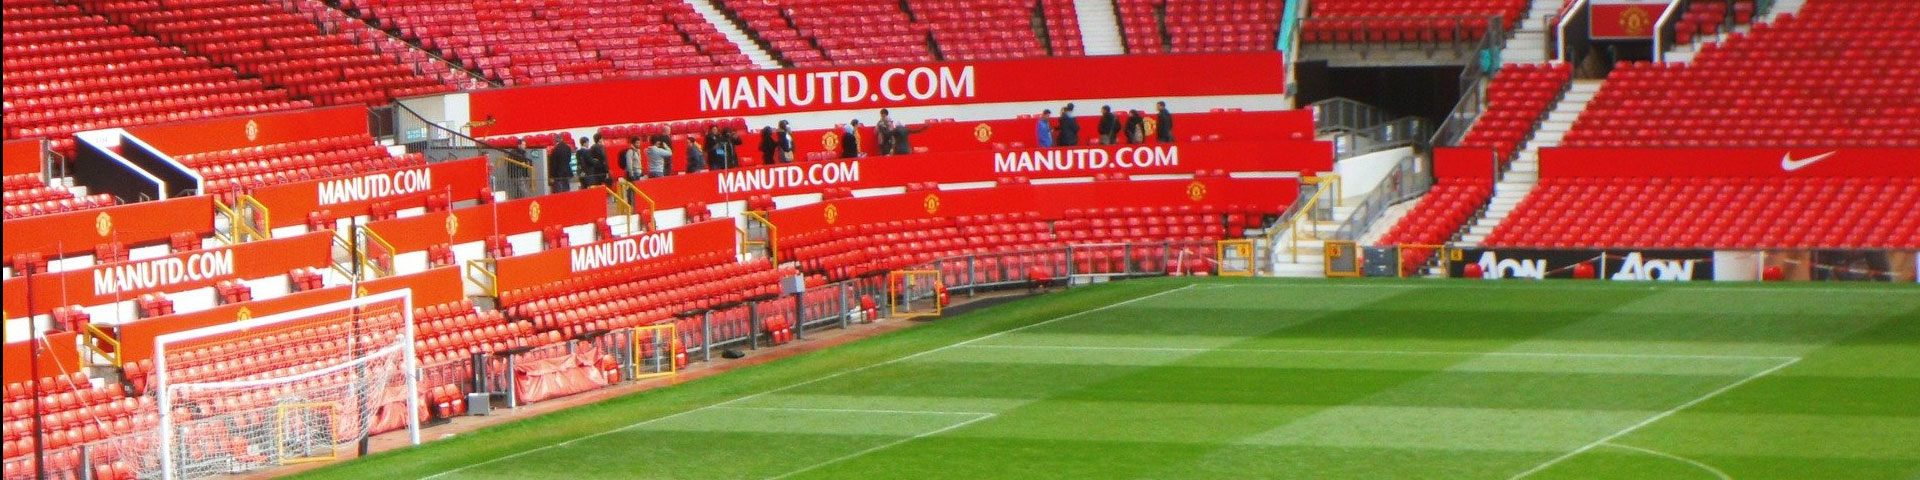 The pitch and seating at Manchester United's stadium, Old Trafford